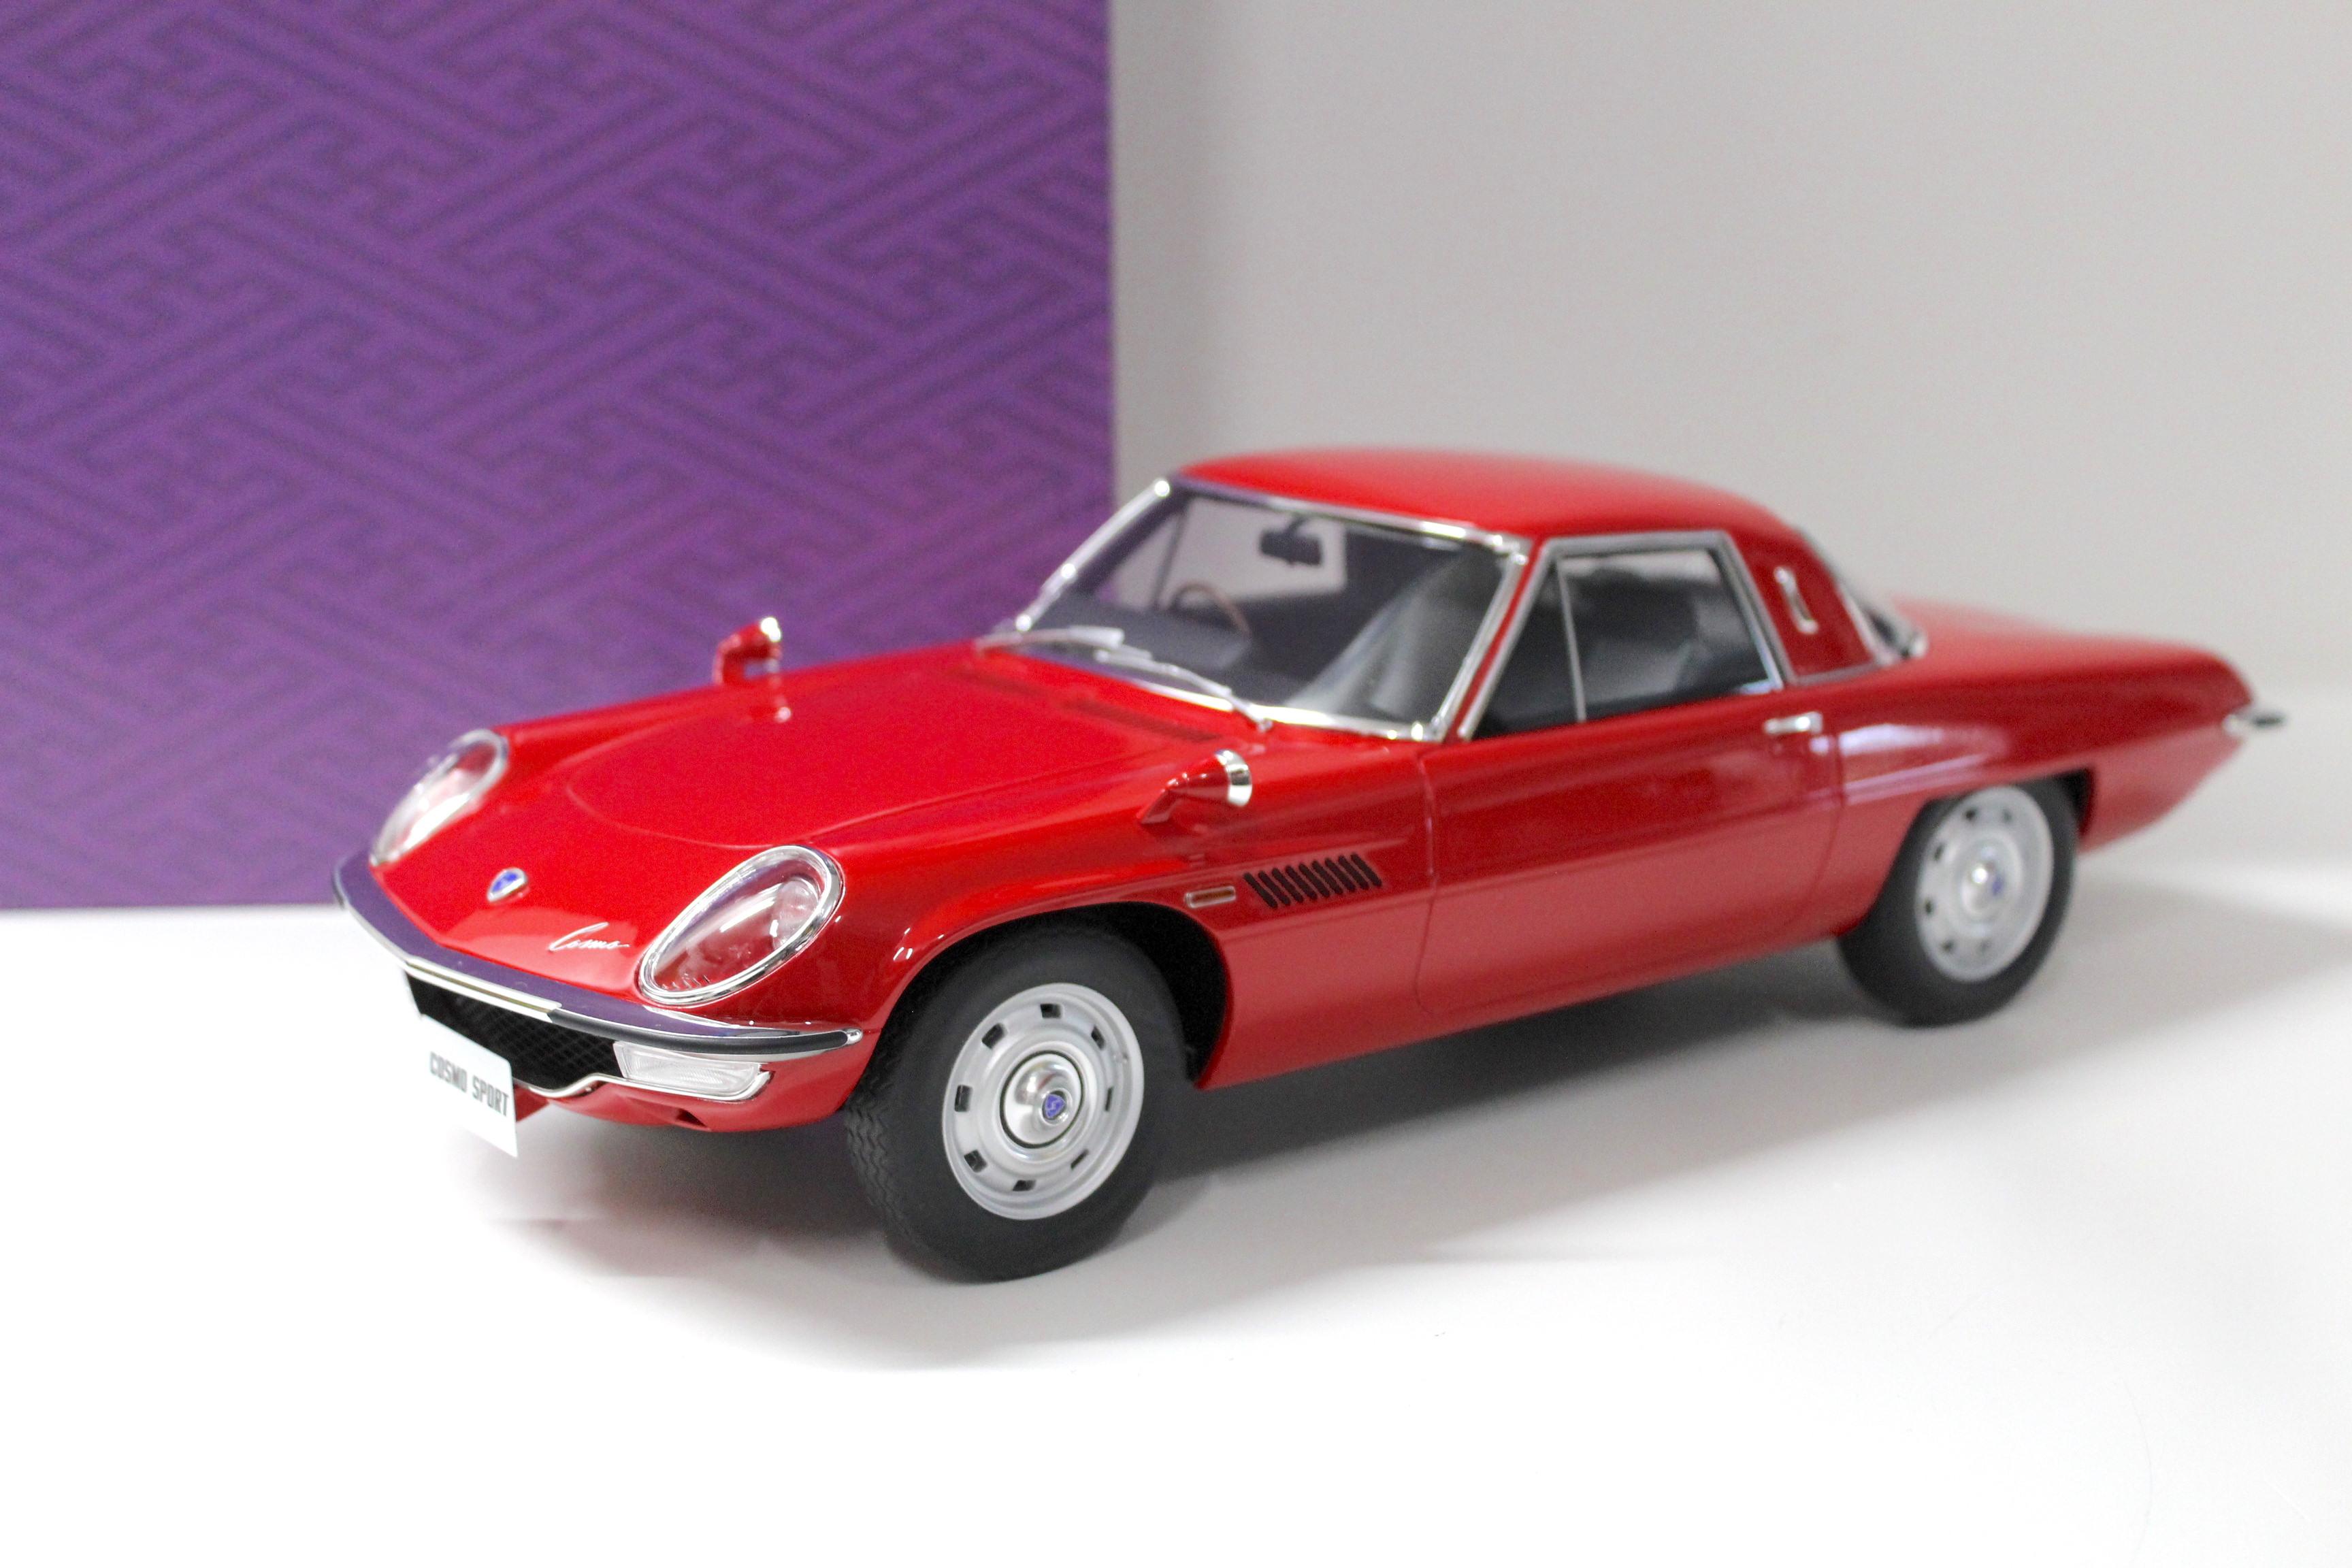 1:12 Kyosho Mazda Cosmo Sport Coupe red